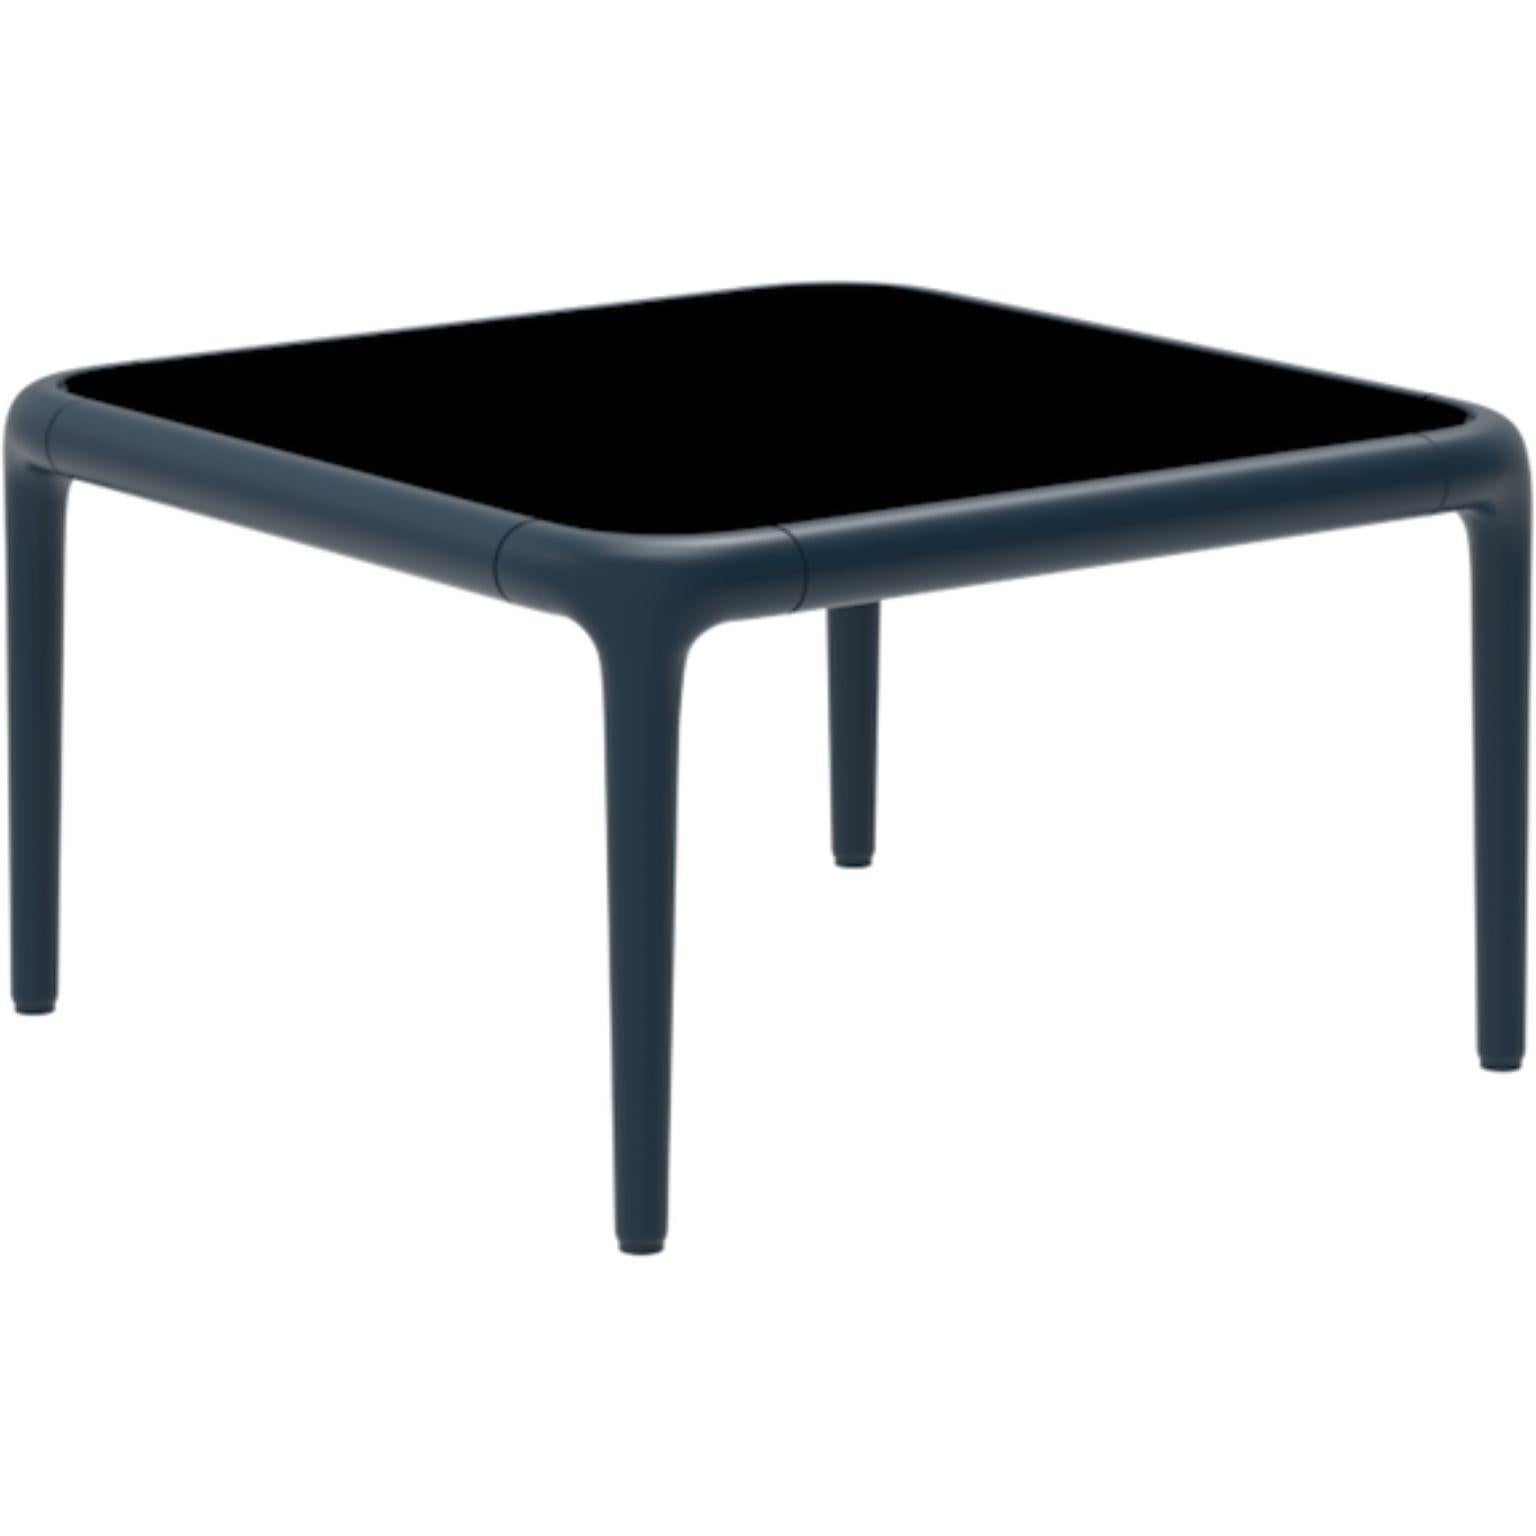 Xaloc navy coffee table 50 with glass top by MOWEE
Dimensions: D50 x W50 x H28 cm
Materials: Aluminum, tinted tempered glass top.
Also available in different aluminum colors and finishes (HPL Black Edge or Neolith).

Xaloc synthesizes the lines